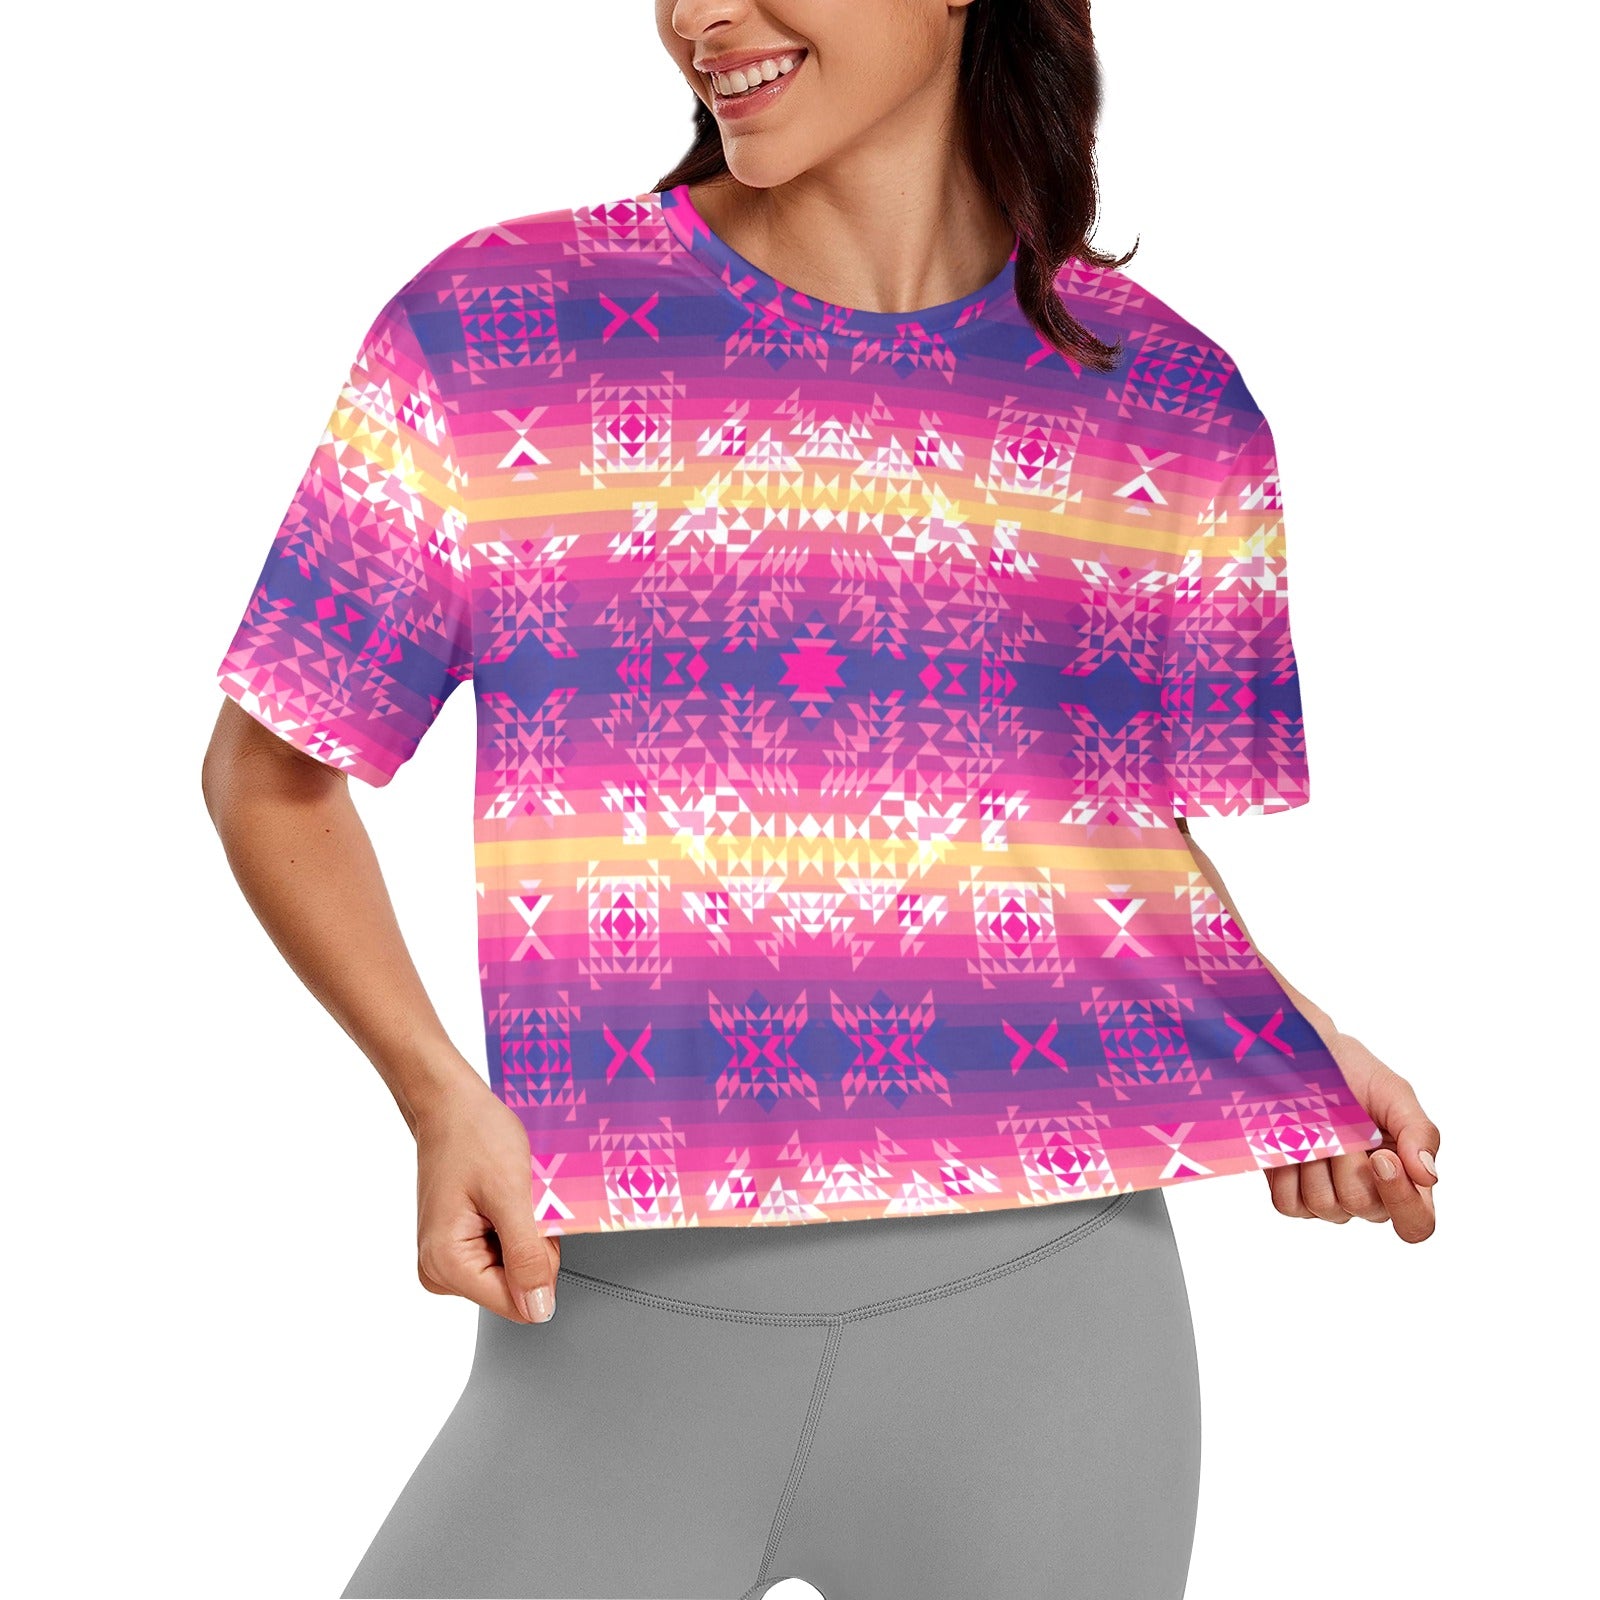 Soleil Overlay Women's Cropped T-shirt